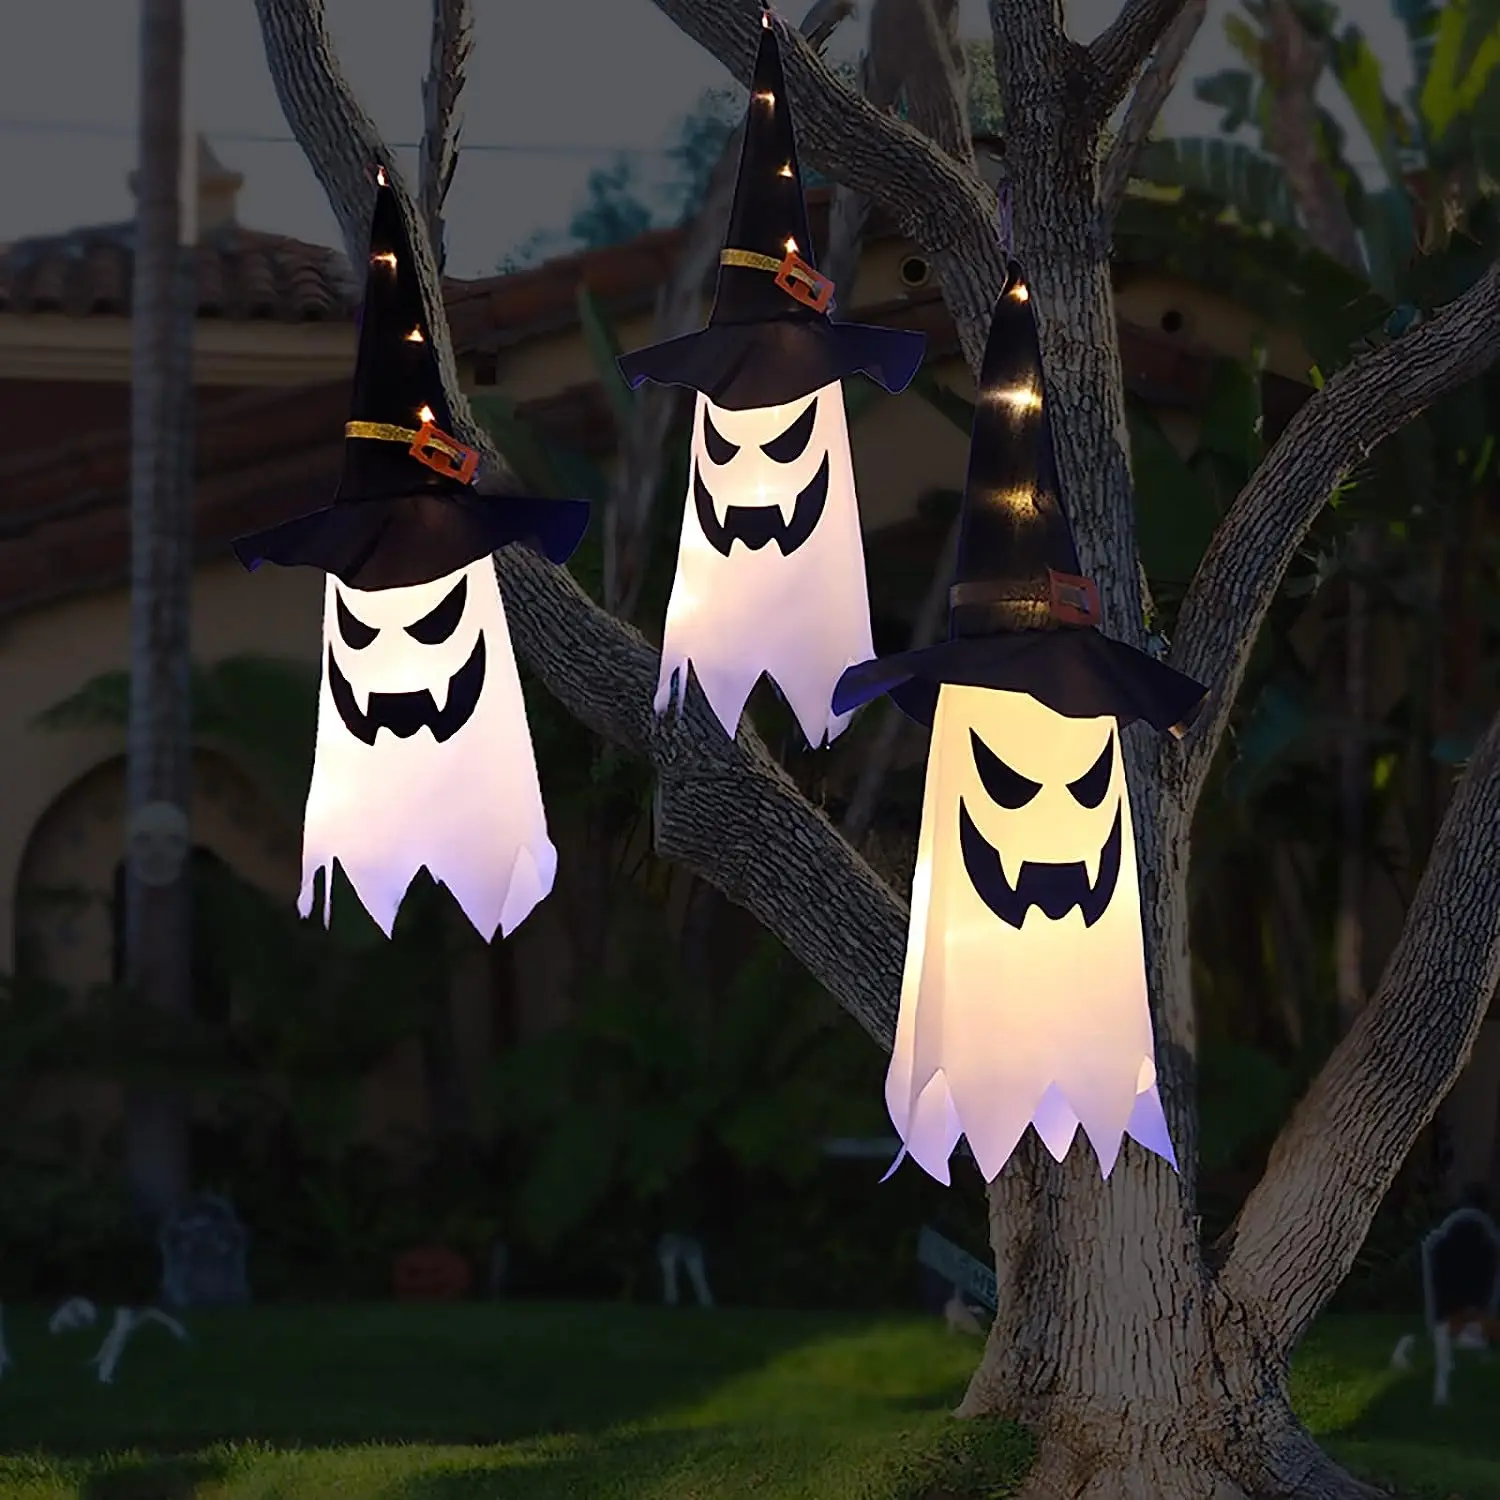 

Halloween Decorations Hanging Lighted Glowing Ghost Witch Hat Outdoor Halloween Party Lights String for Yard Tree Garden(3Pcs)